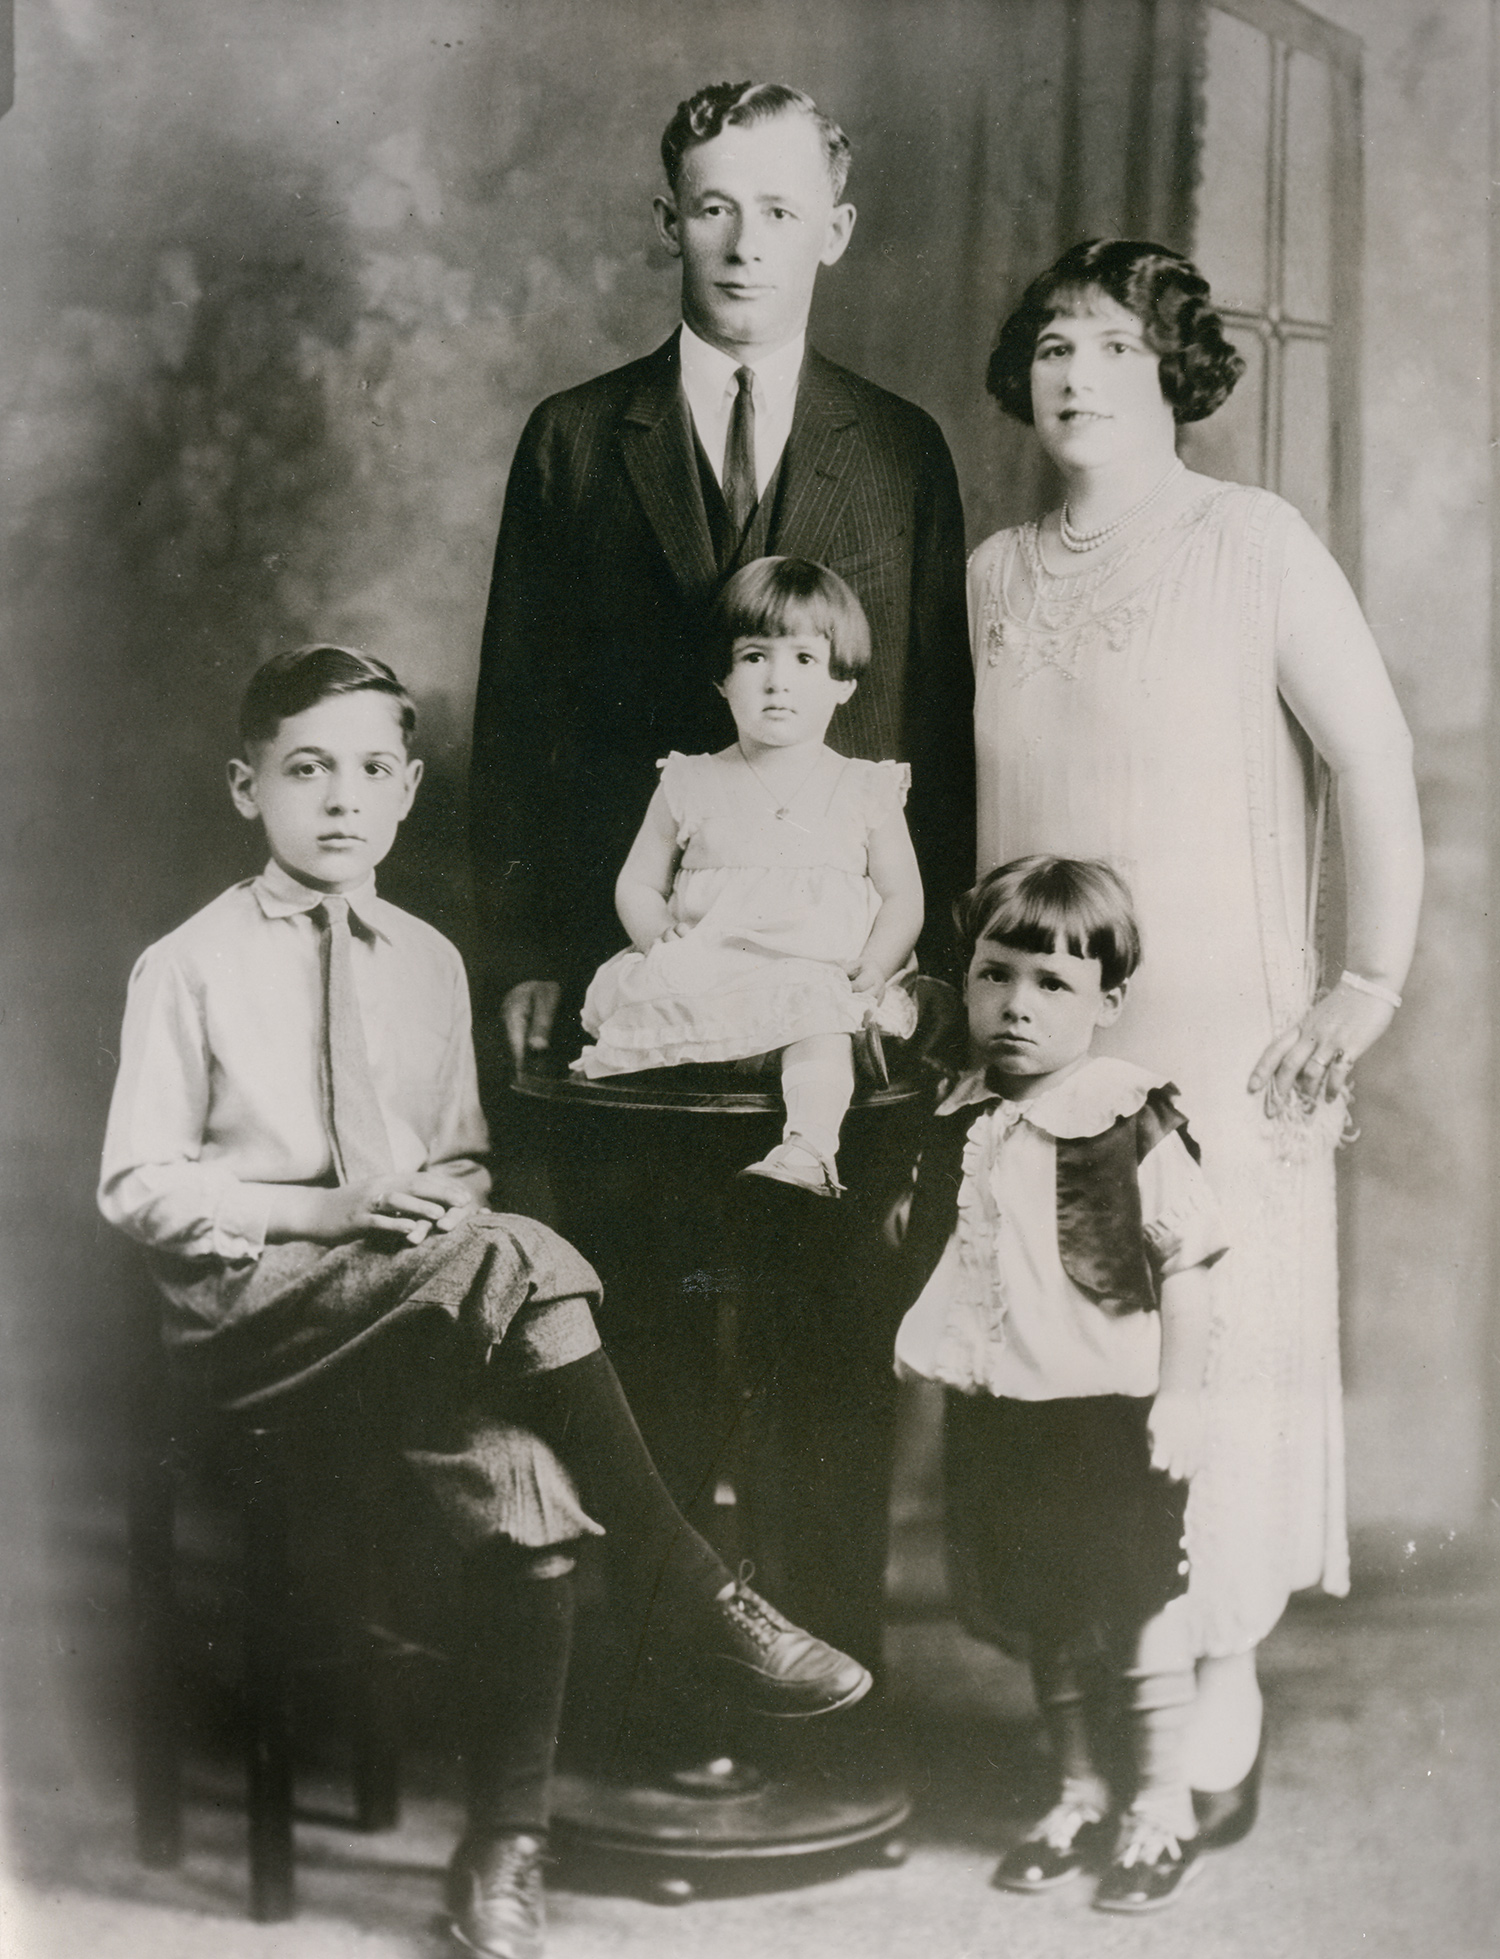 A family of two adults and three children pose in early 20th century attire. A man wearing a dark suit stands next to a woman wearing a light-colored long dress in the background while their children, a school-age male, a toddler female, and a young male child pose in the foreground. 